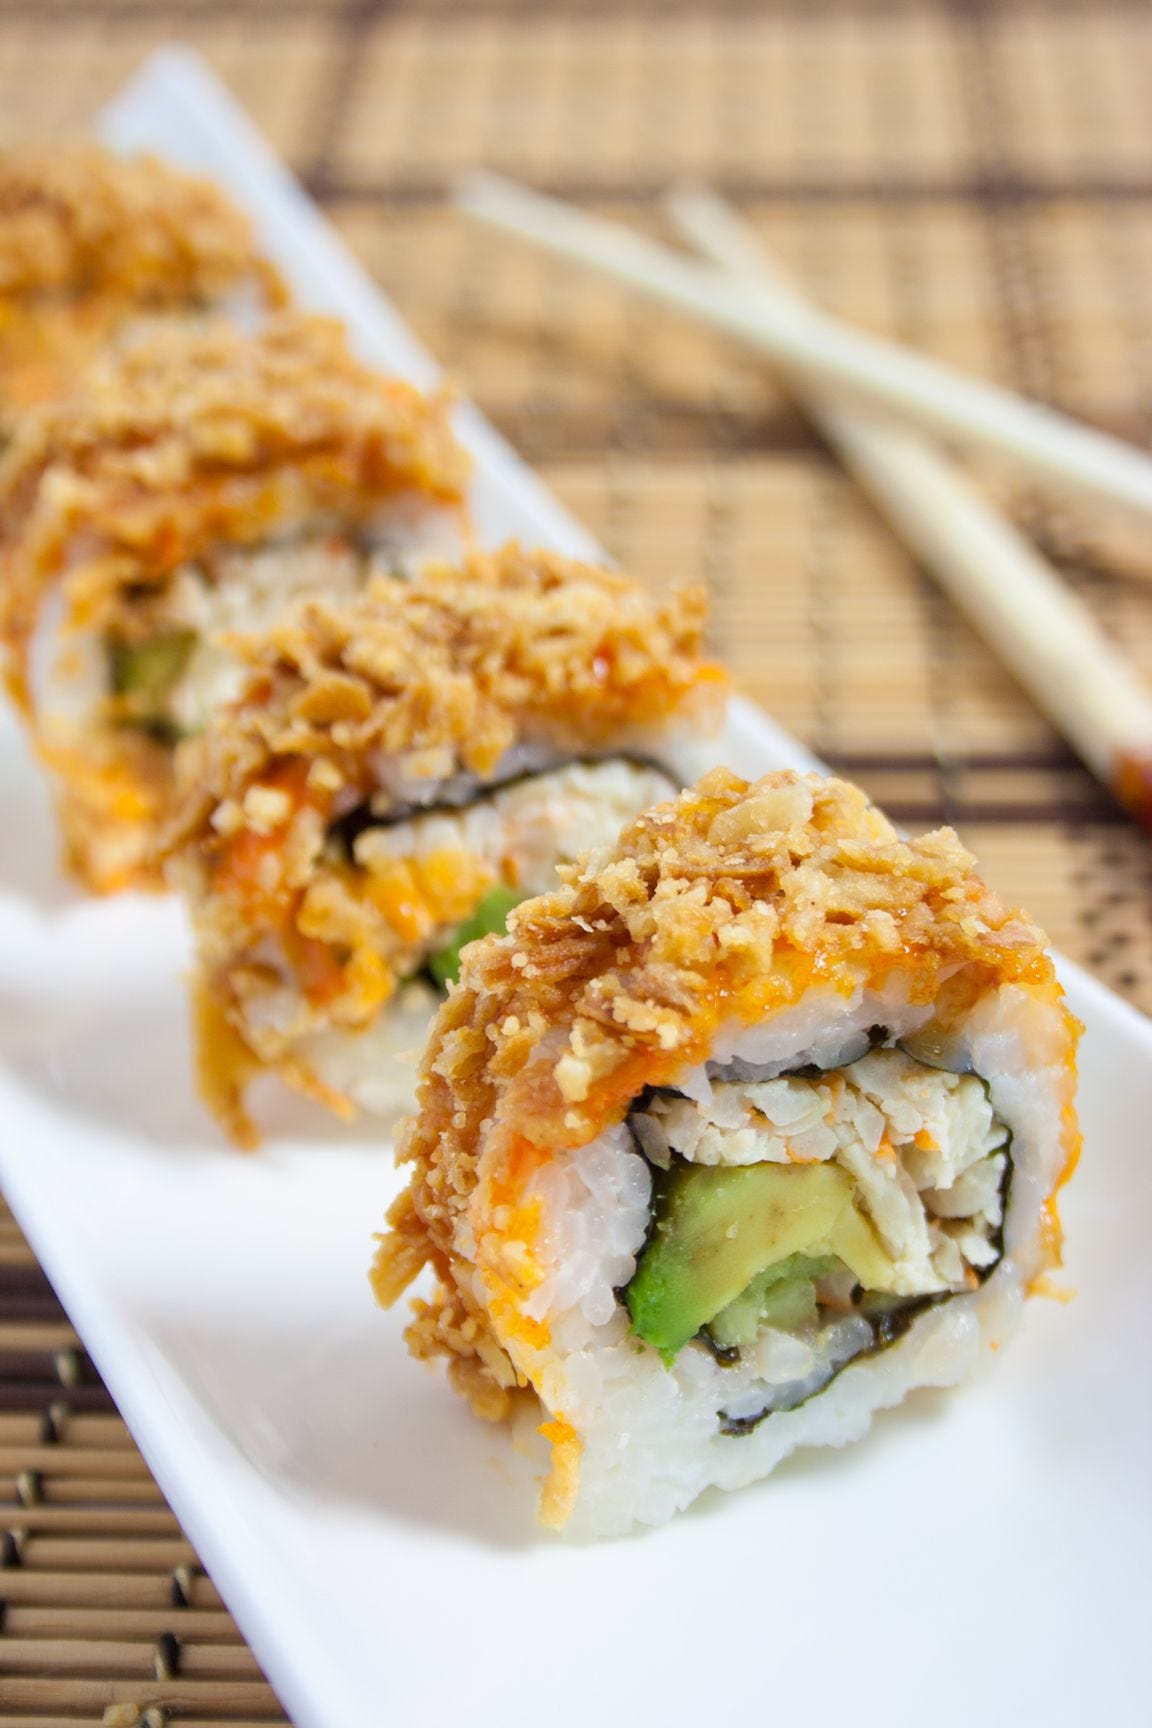 Sushi Roll recipes to make @ home! Sushi Roll recipes to make @ home! Seafood Recipes, Cooking Recipes, Healthy Recipes, Diet Recipes, Easy Recipes, Sushi Roll Recipes, Crunchy Crab Sushi Roll Recipe, Cooked Sushi Rolls, Cooked Sushi Recipes